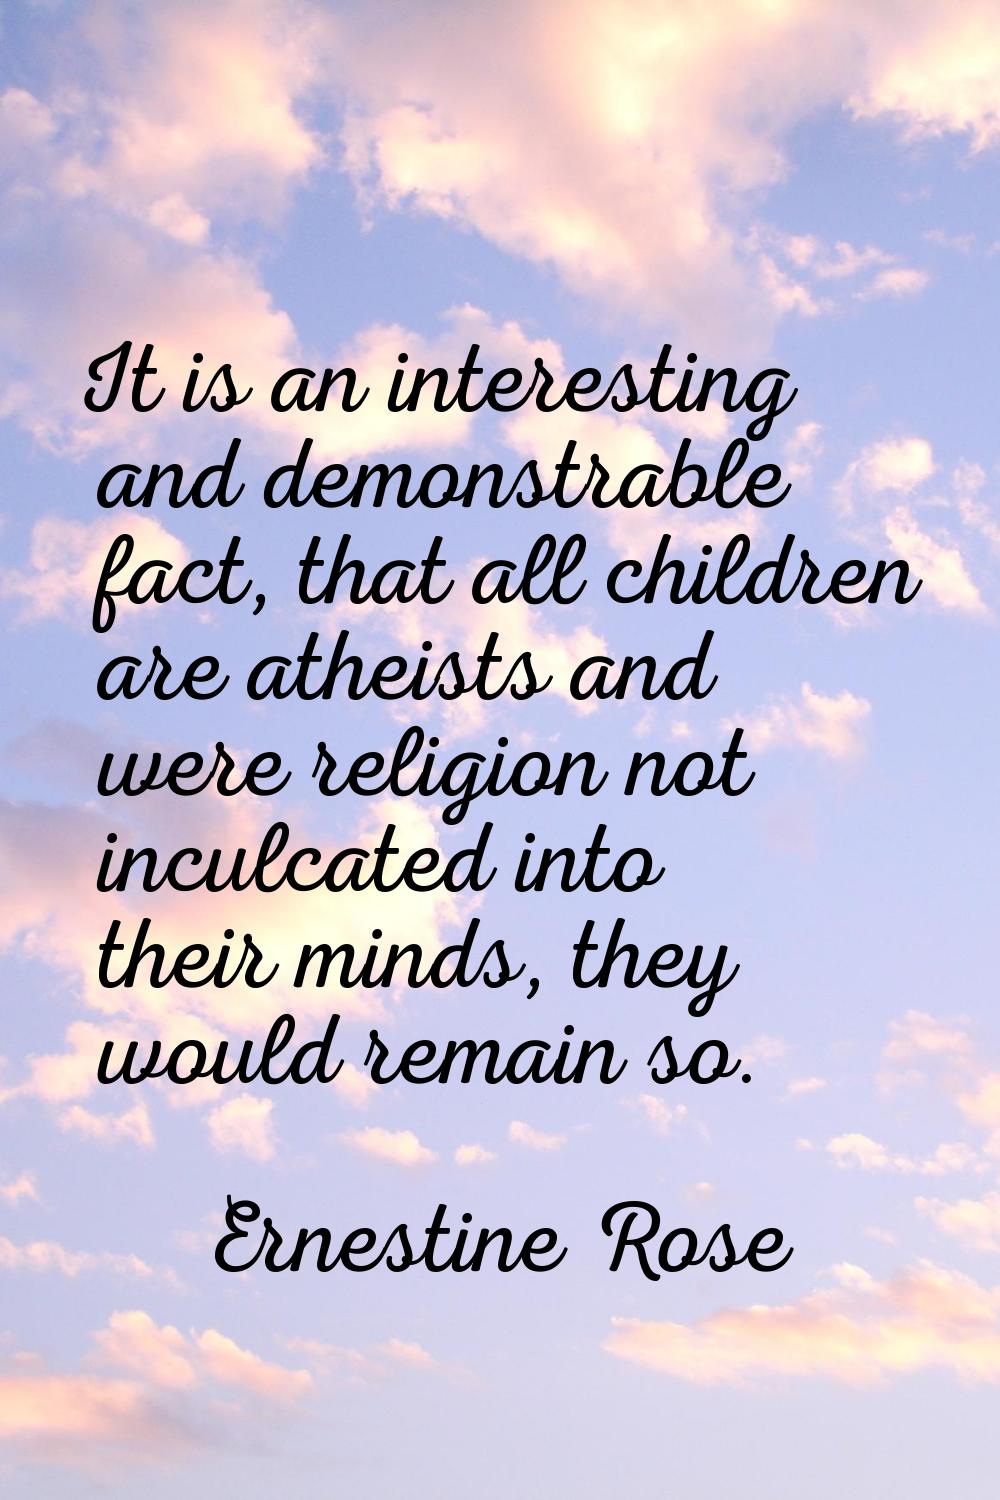 It is an interesting and demonstrable fact, that all children are atheists and were religion not in